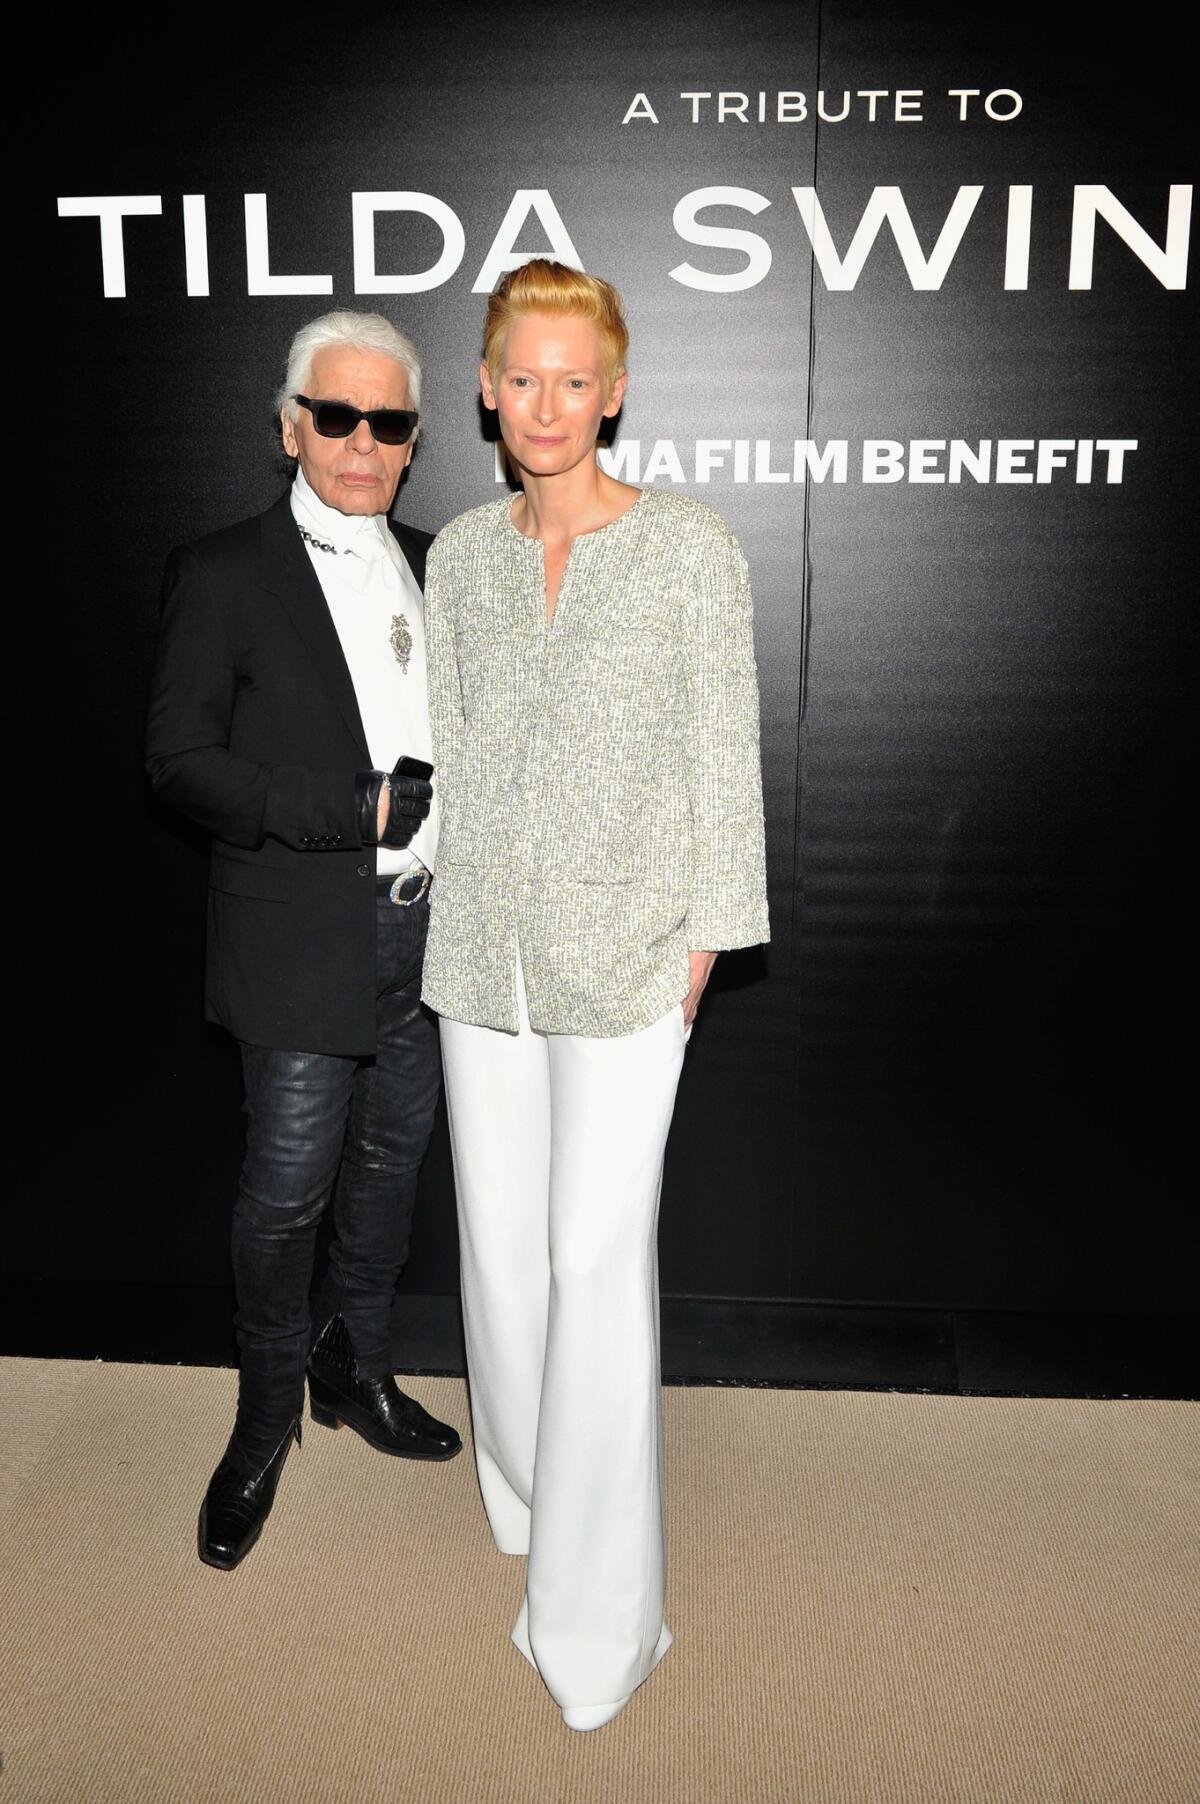 Designer Karl Lagerfeld and actress Tilda Swinton attend the Museum of Modern Art Film Benefit: A Tribute to Tilda Swinton reception at Museum of Modern Art on Tuesday in New York City.